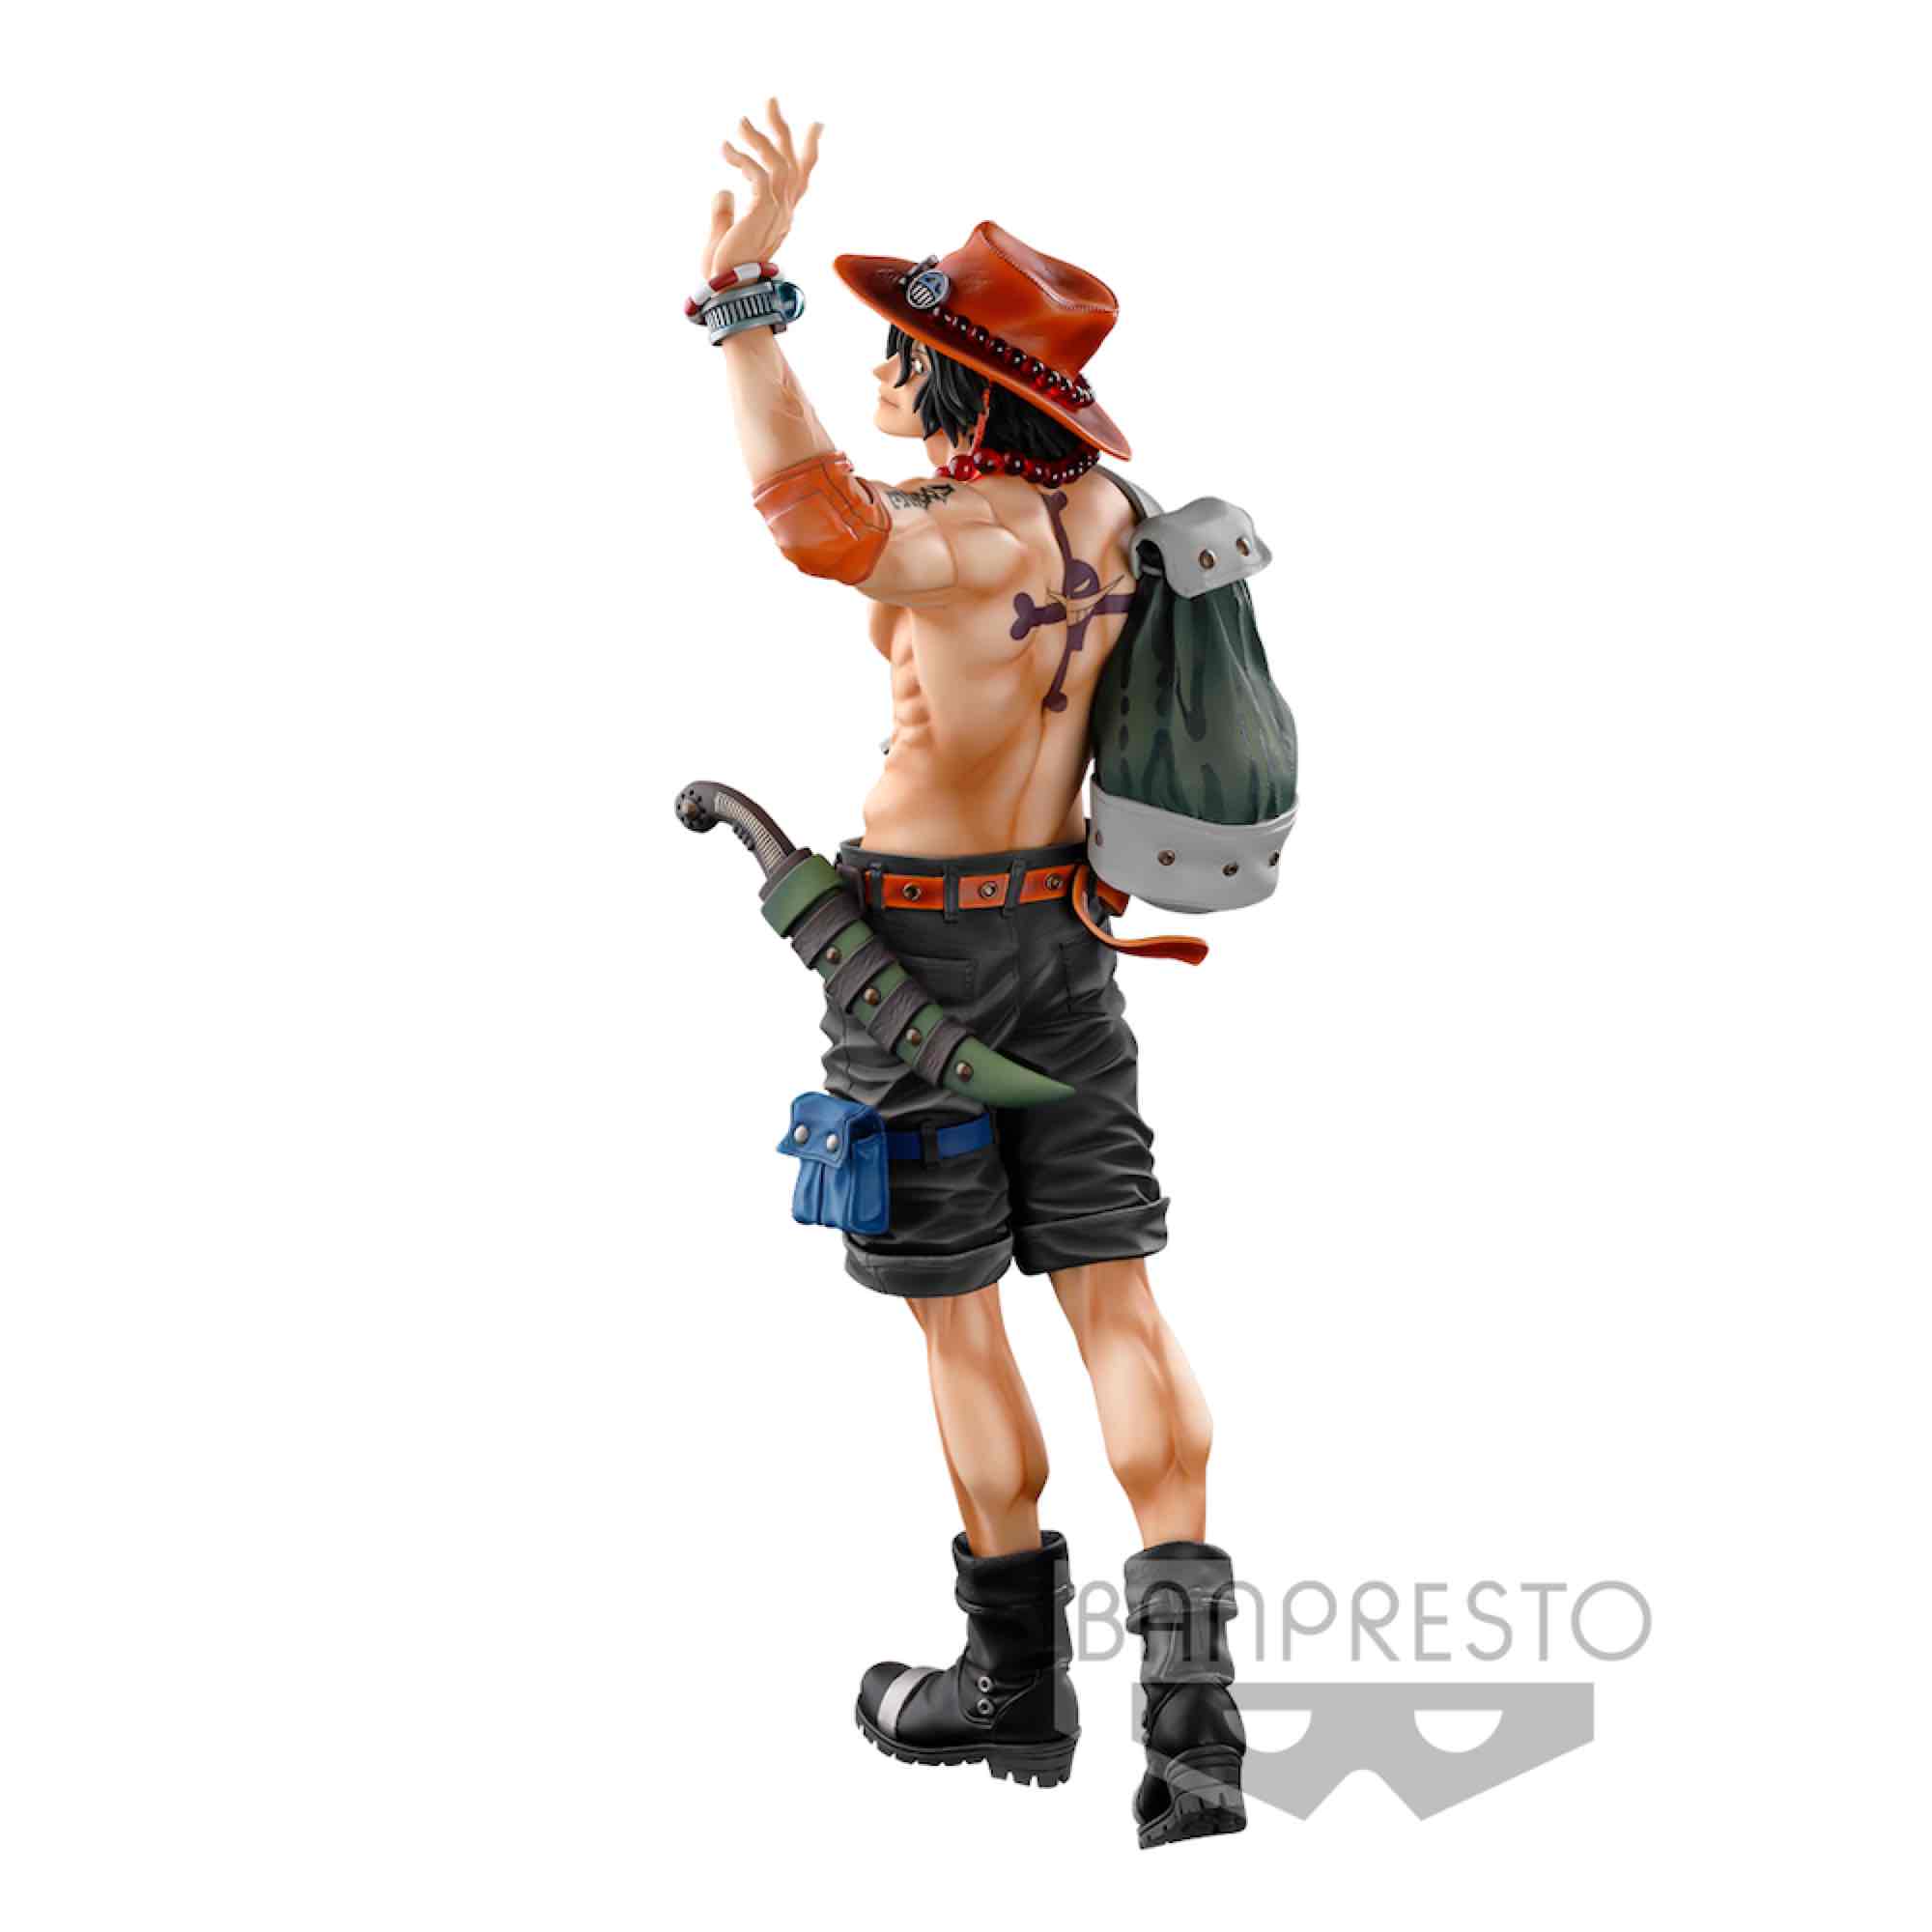 PORTGAS D. ACE (THE BRUSH) FIG 30 CM ONE PIECE WOR